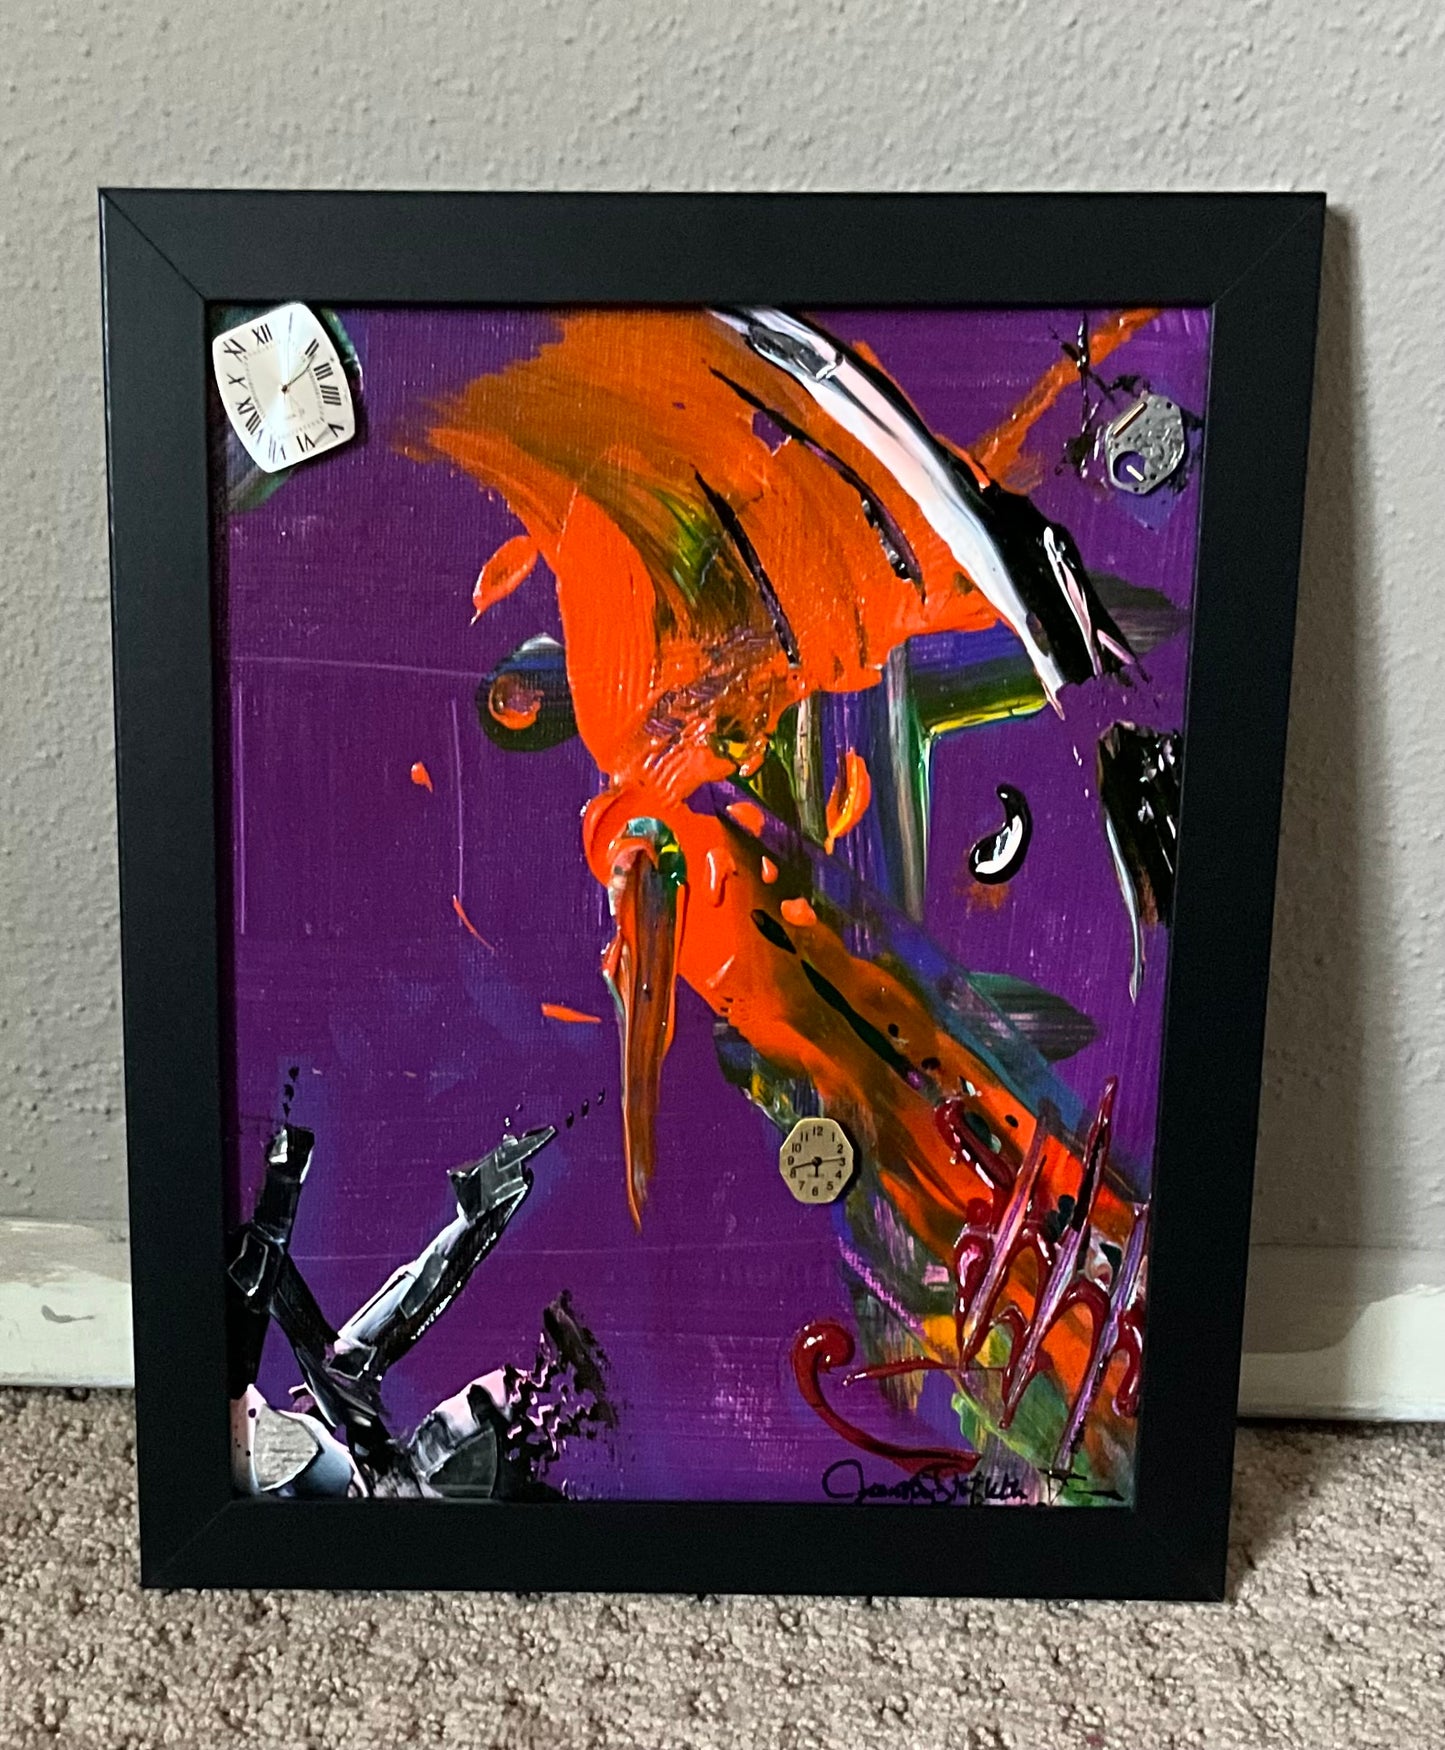 “Time, Light, Heat, Healing” - 9”x11” Multi Media Abstract Painting on Canvas. Signed & Professionally Framed.